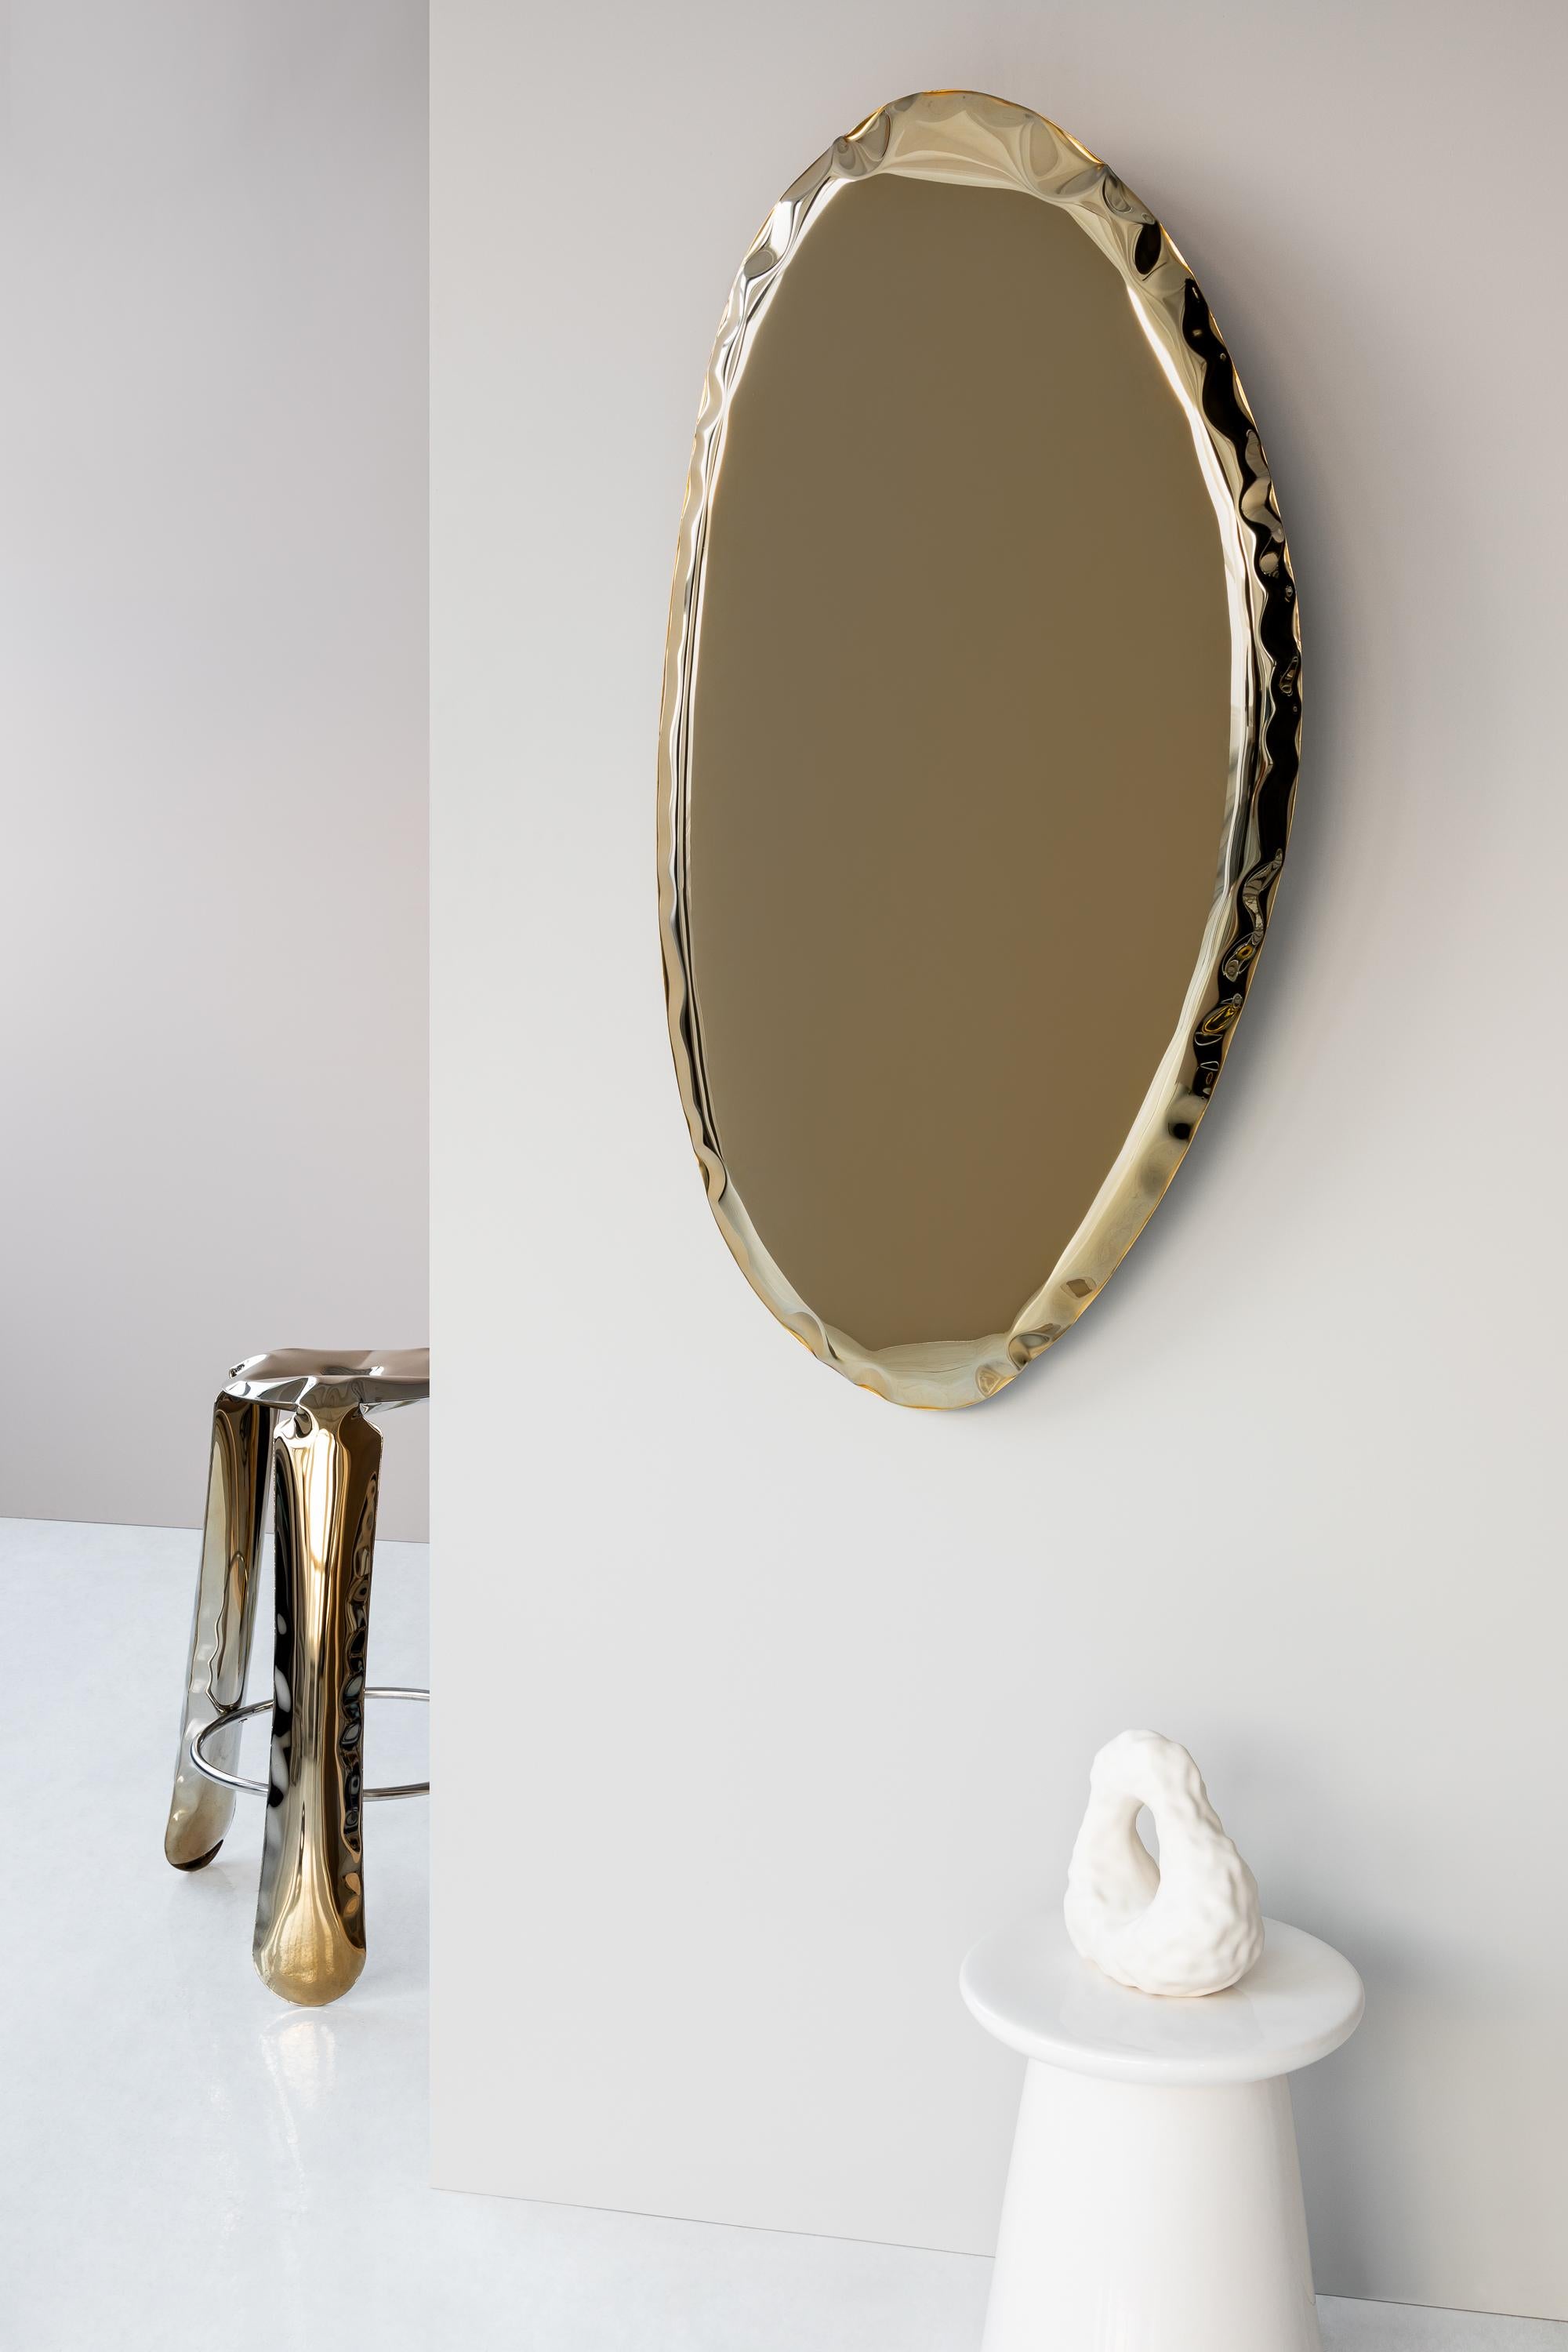 Contemporary Rose Gold Tafla O4 Wall Mirror by Zieta For Sale